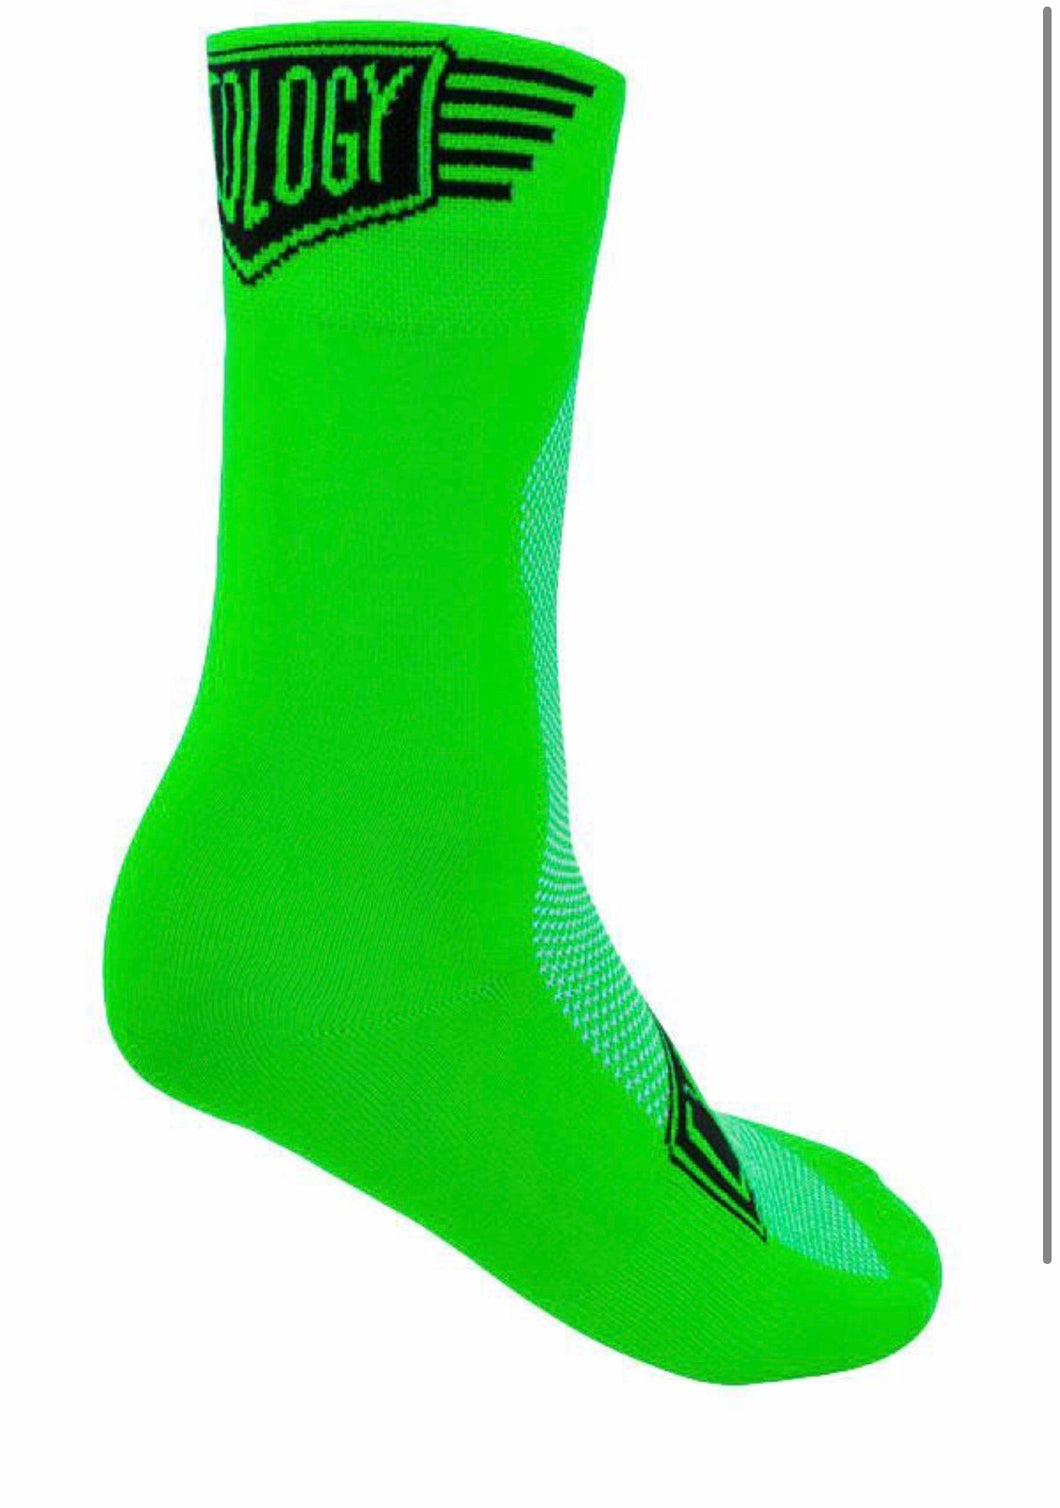 Cycology Quality Unisex Compression Cycling Socks - Design Fluoro Green